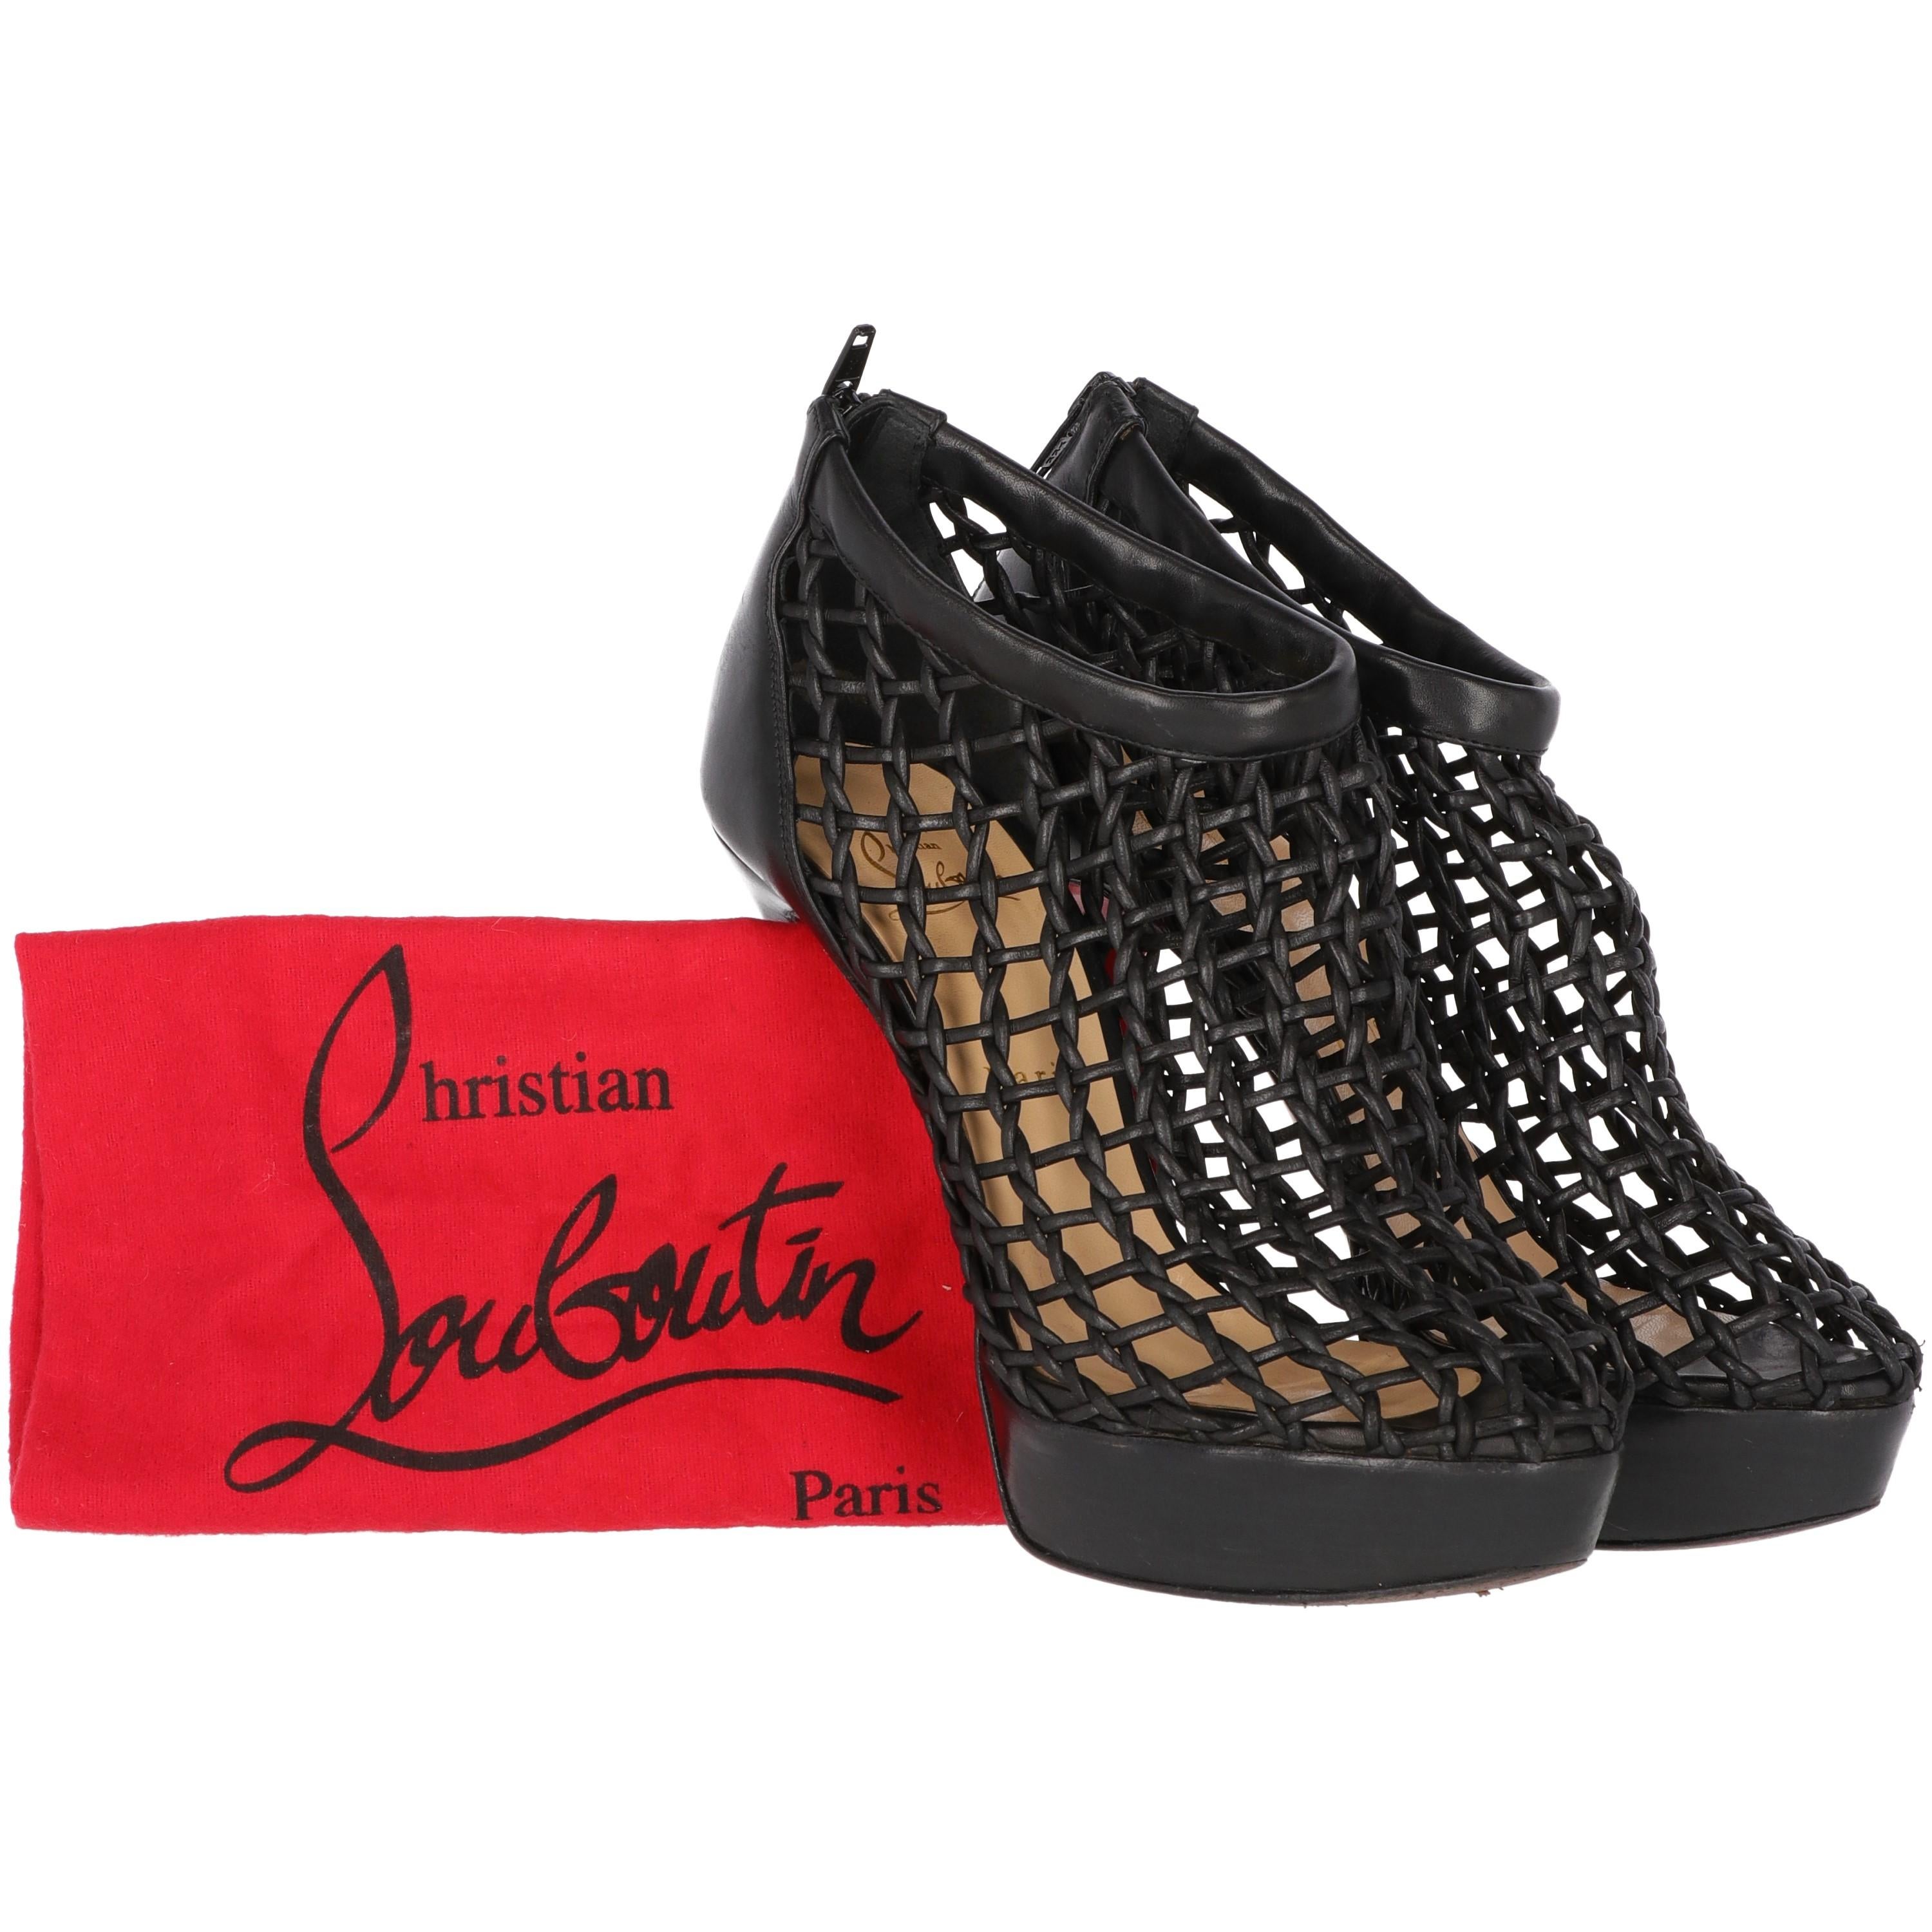 The stylish Christian Louboutin black braided leather pumps with 13 cm spike heels and 3 cm platform, feature a back zip fastening and round toes. With authentic dustbag, the item shows lightly scratches on the heels and platforms, as shown in the